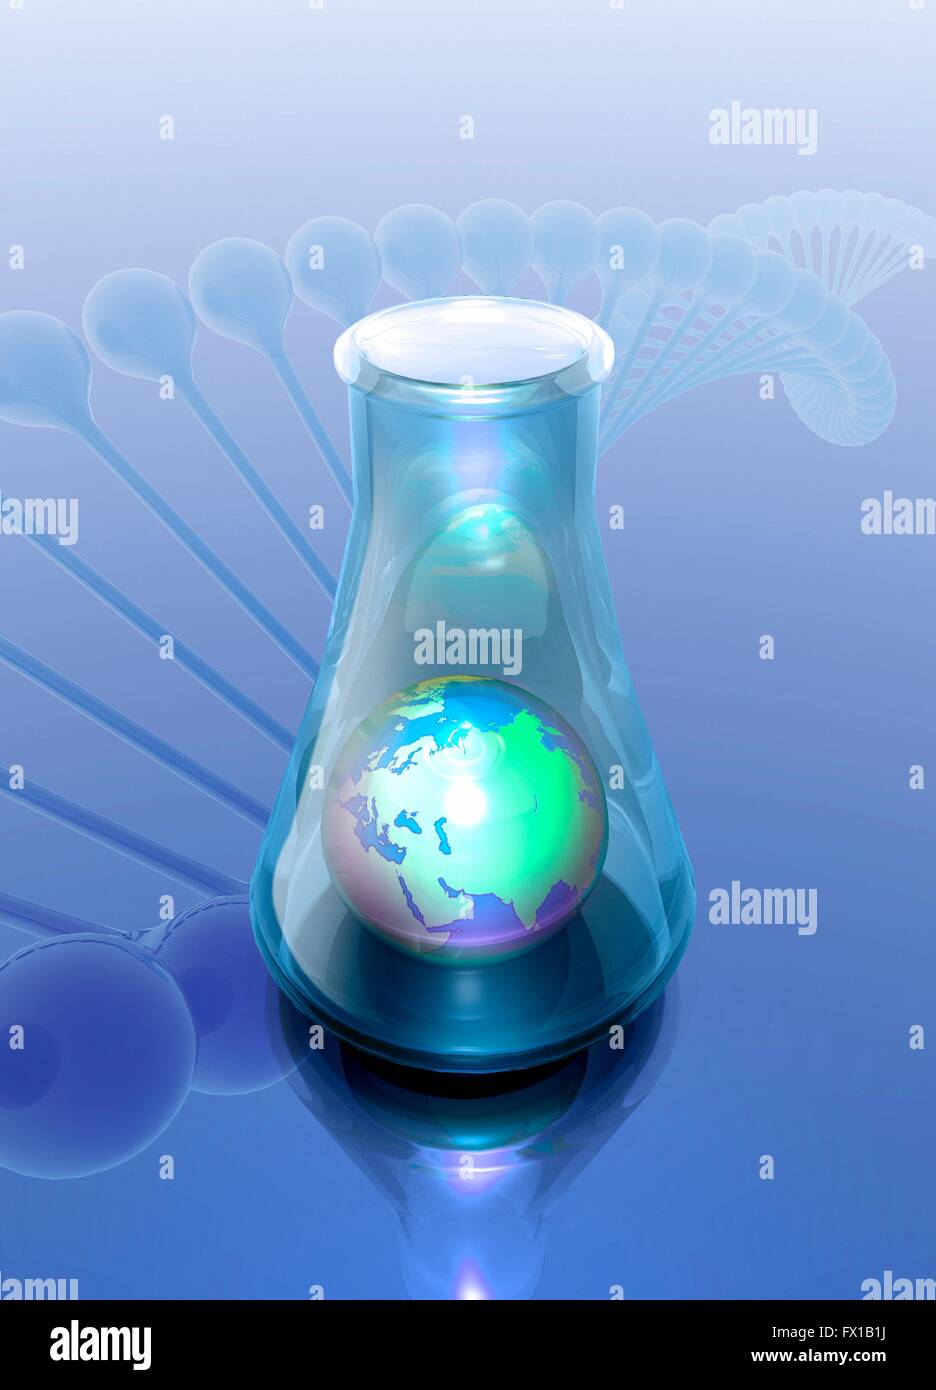 Chemical flask with globe, illustration. Stock Photo